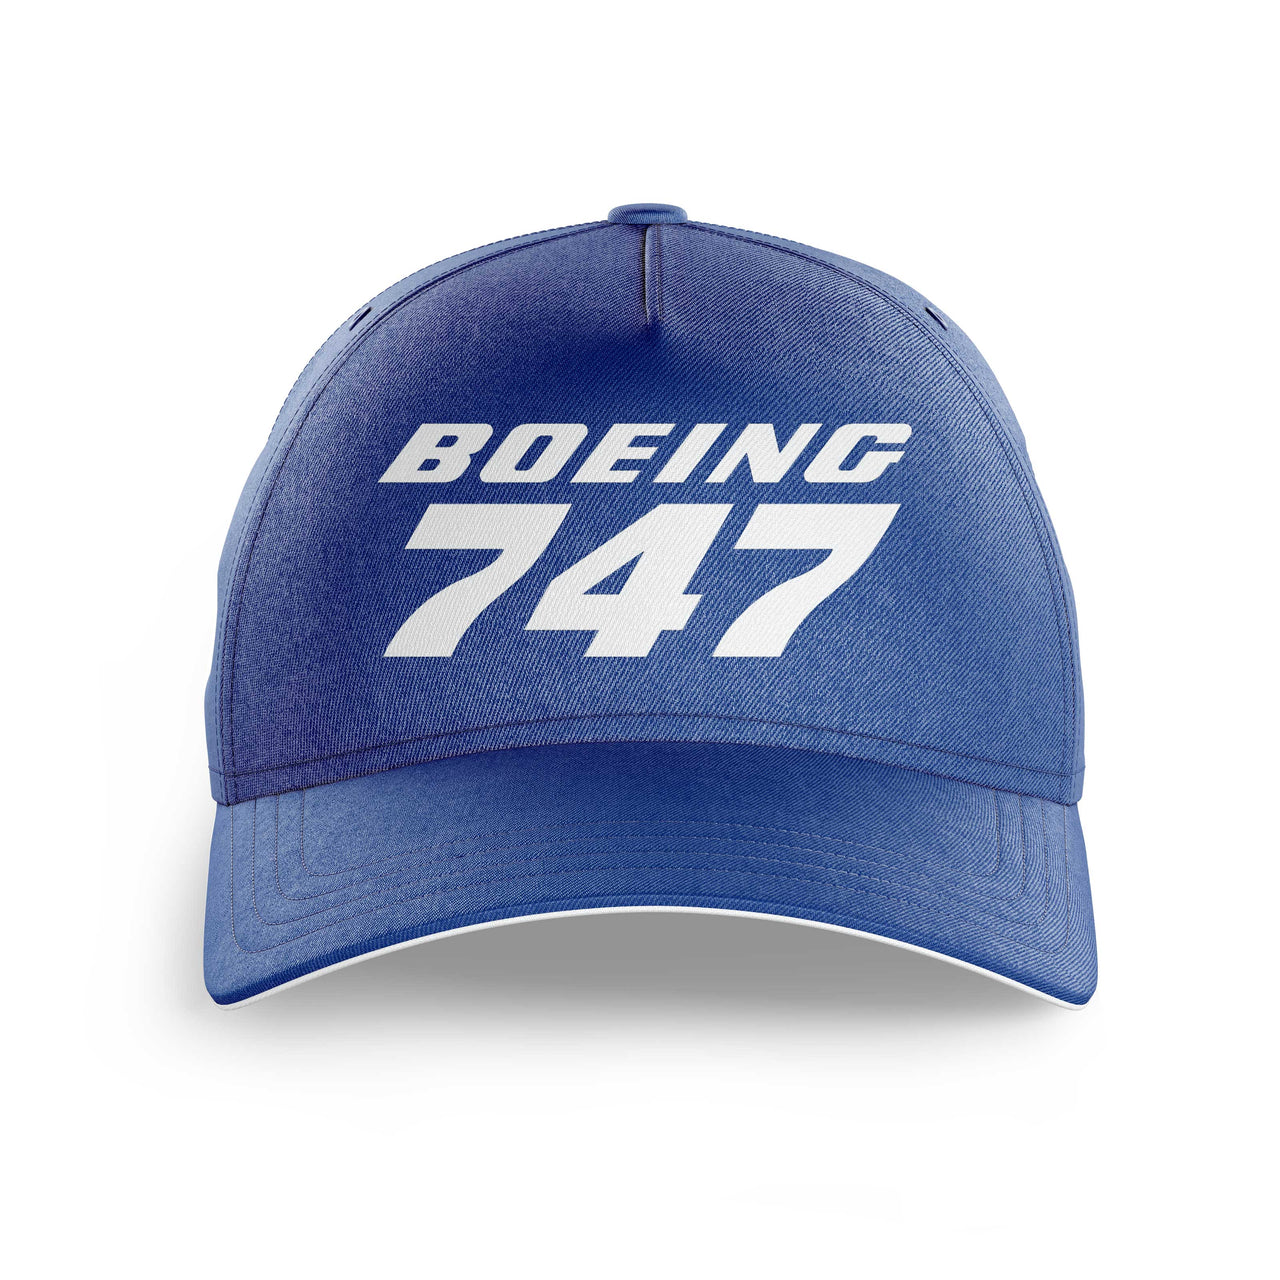 Boeing 747 & Text Printed Hats